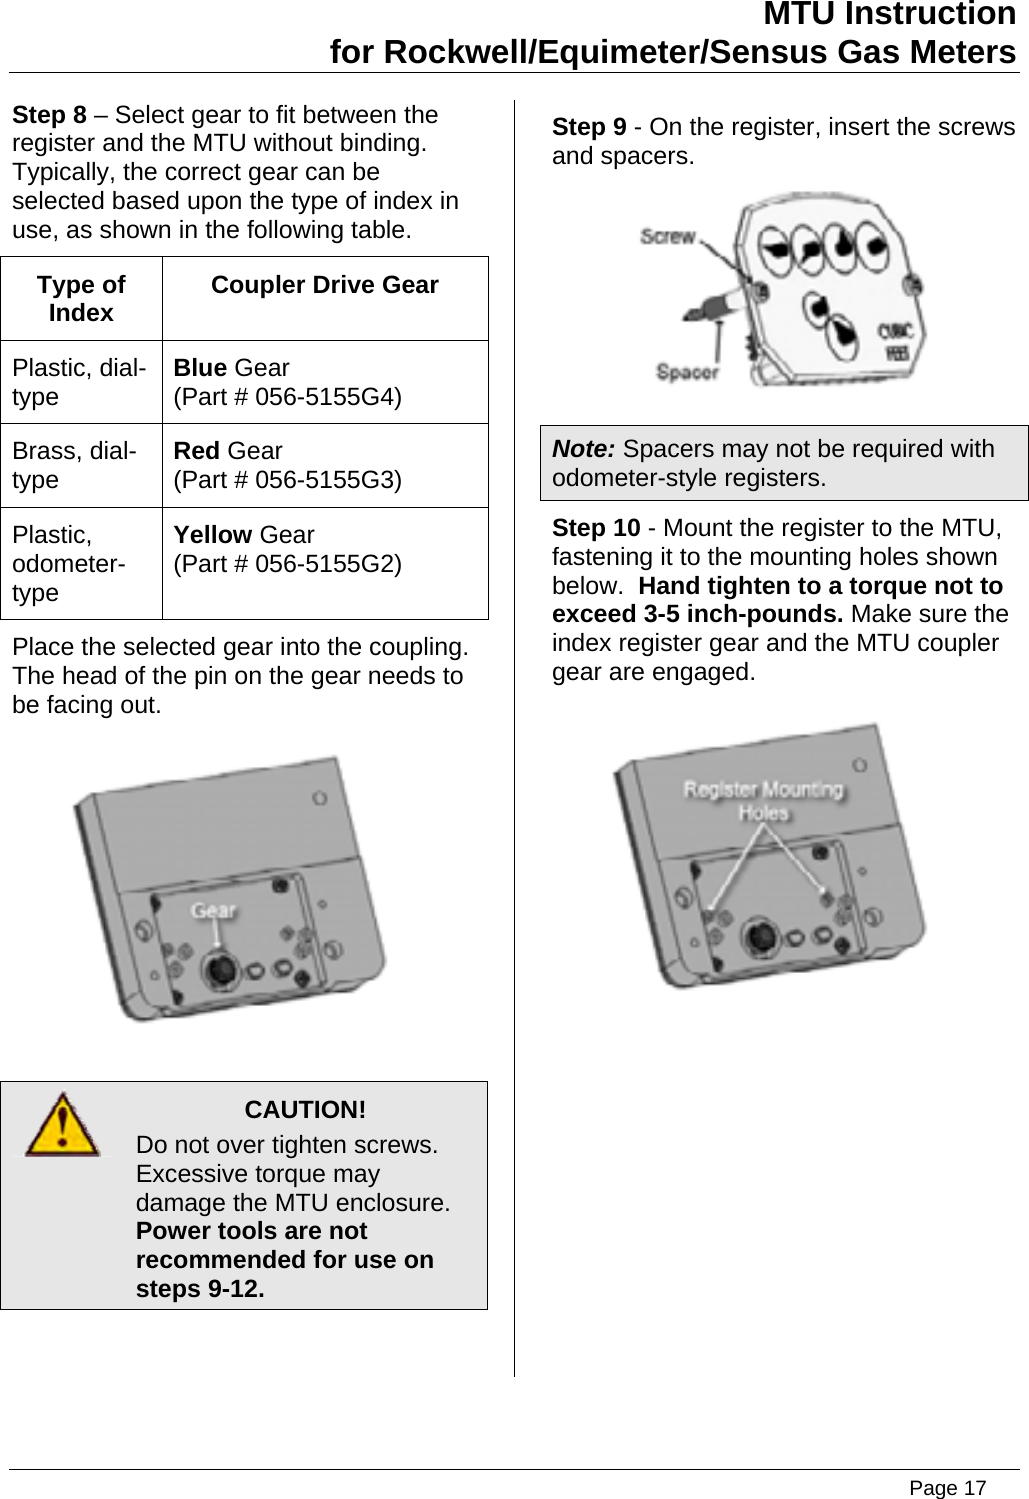 Page 17 of Aclara Technologies 09015 Transmitter for Meter Reading User Manual users manual